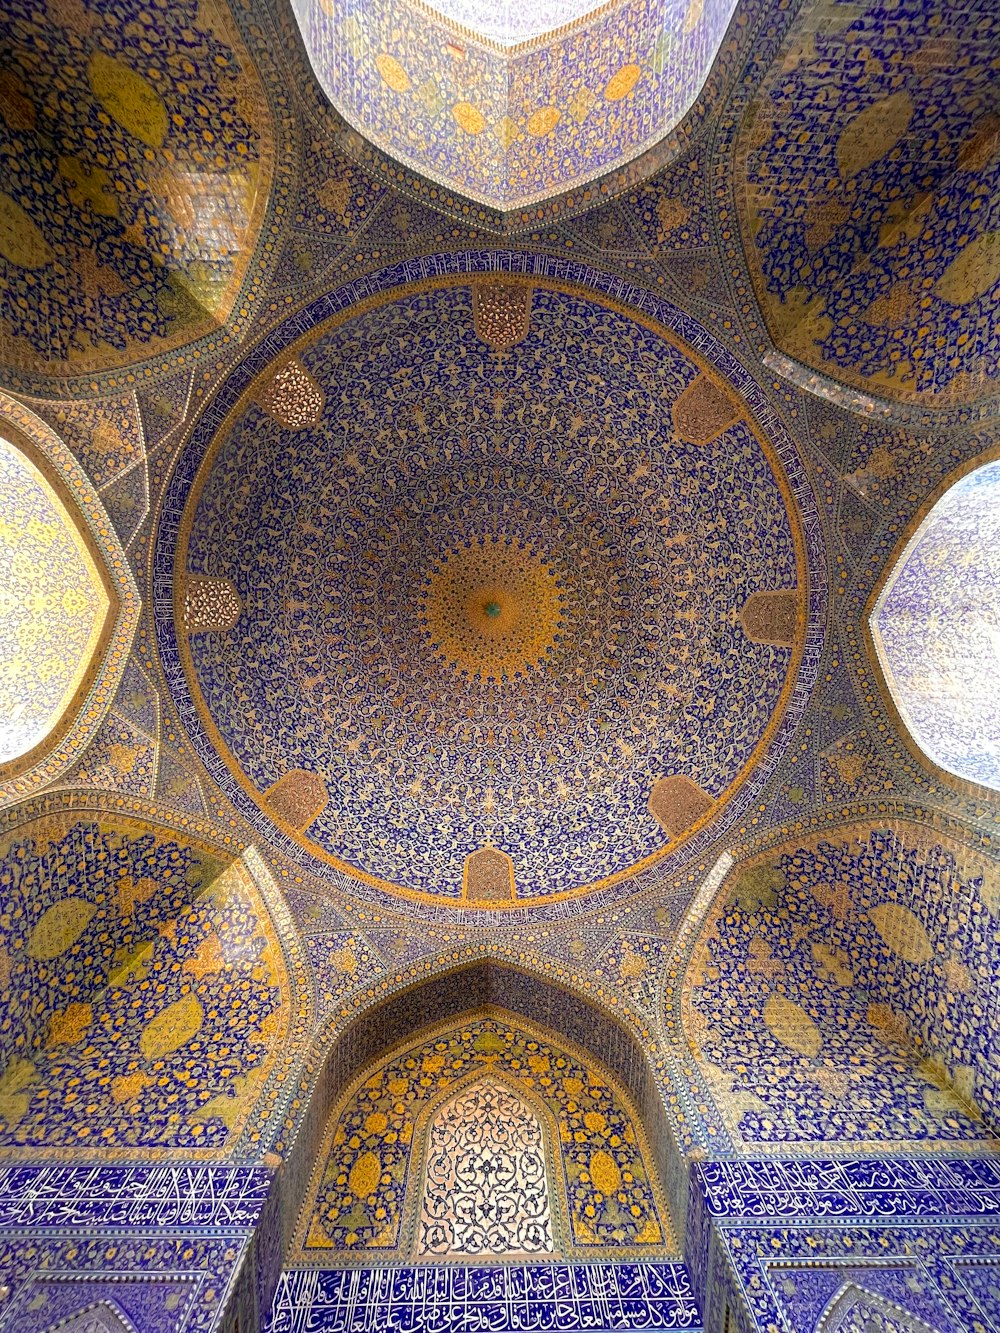 the ceiling of a building with blue and yellow tiles